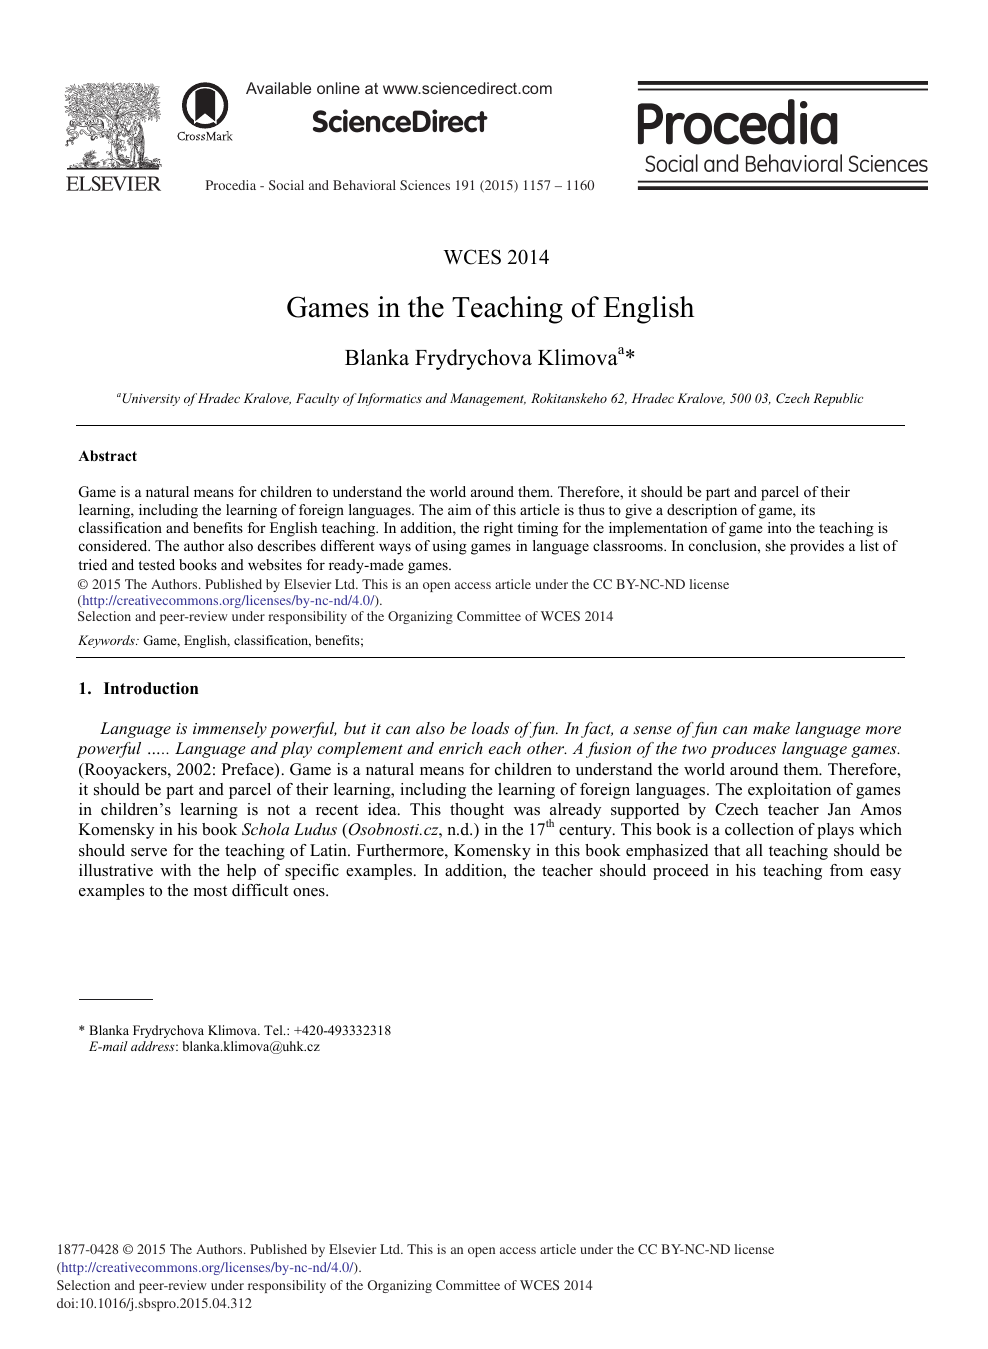 Games, simulations and role-playing, TeachingEnglish